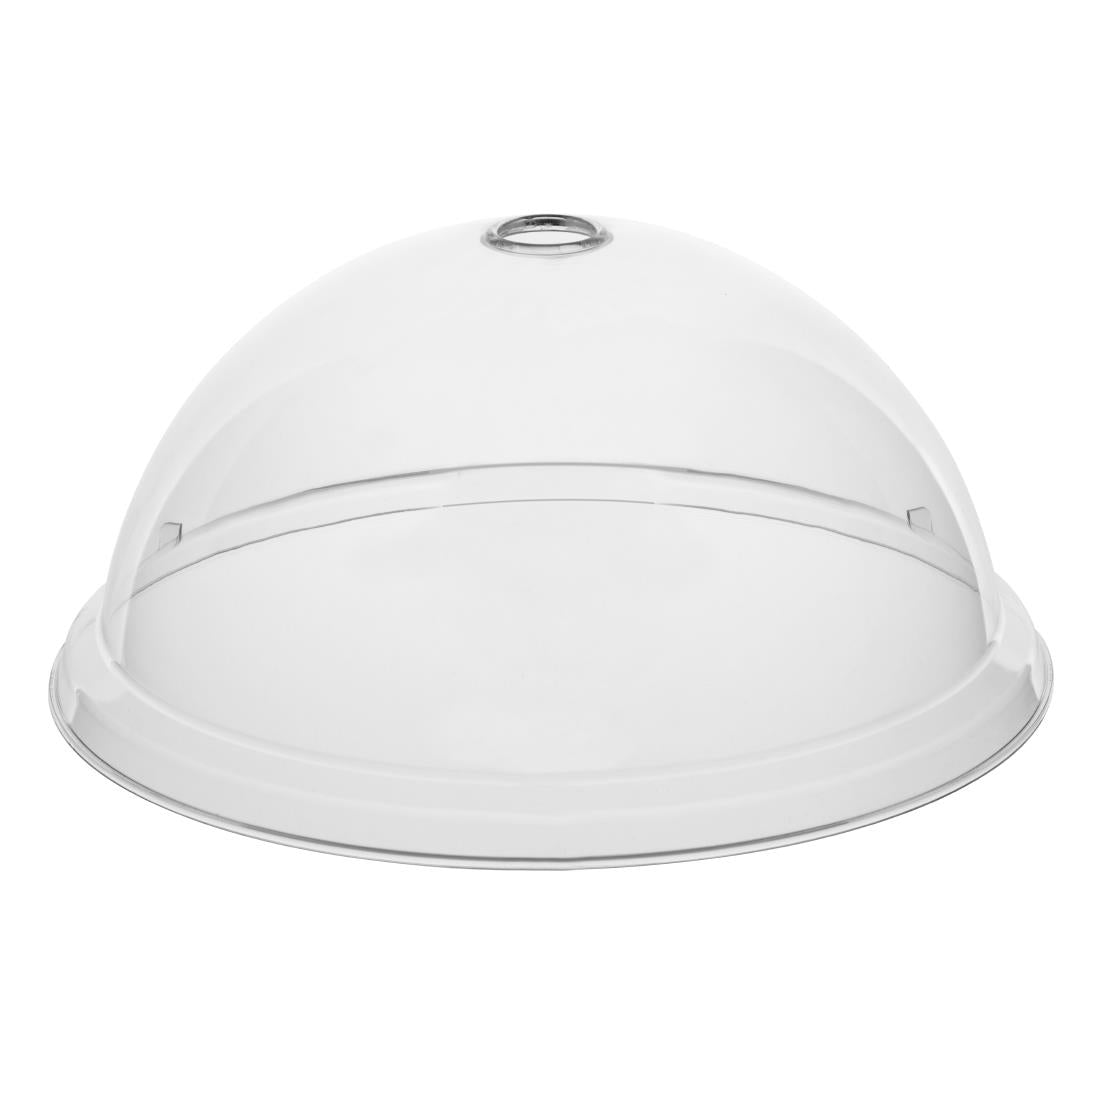 DP792 Olympia Kristallon Polycarbonate Domed Plate Cover Round 300mm